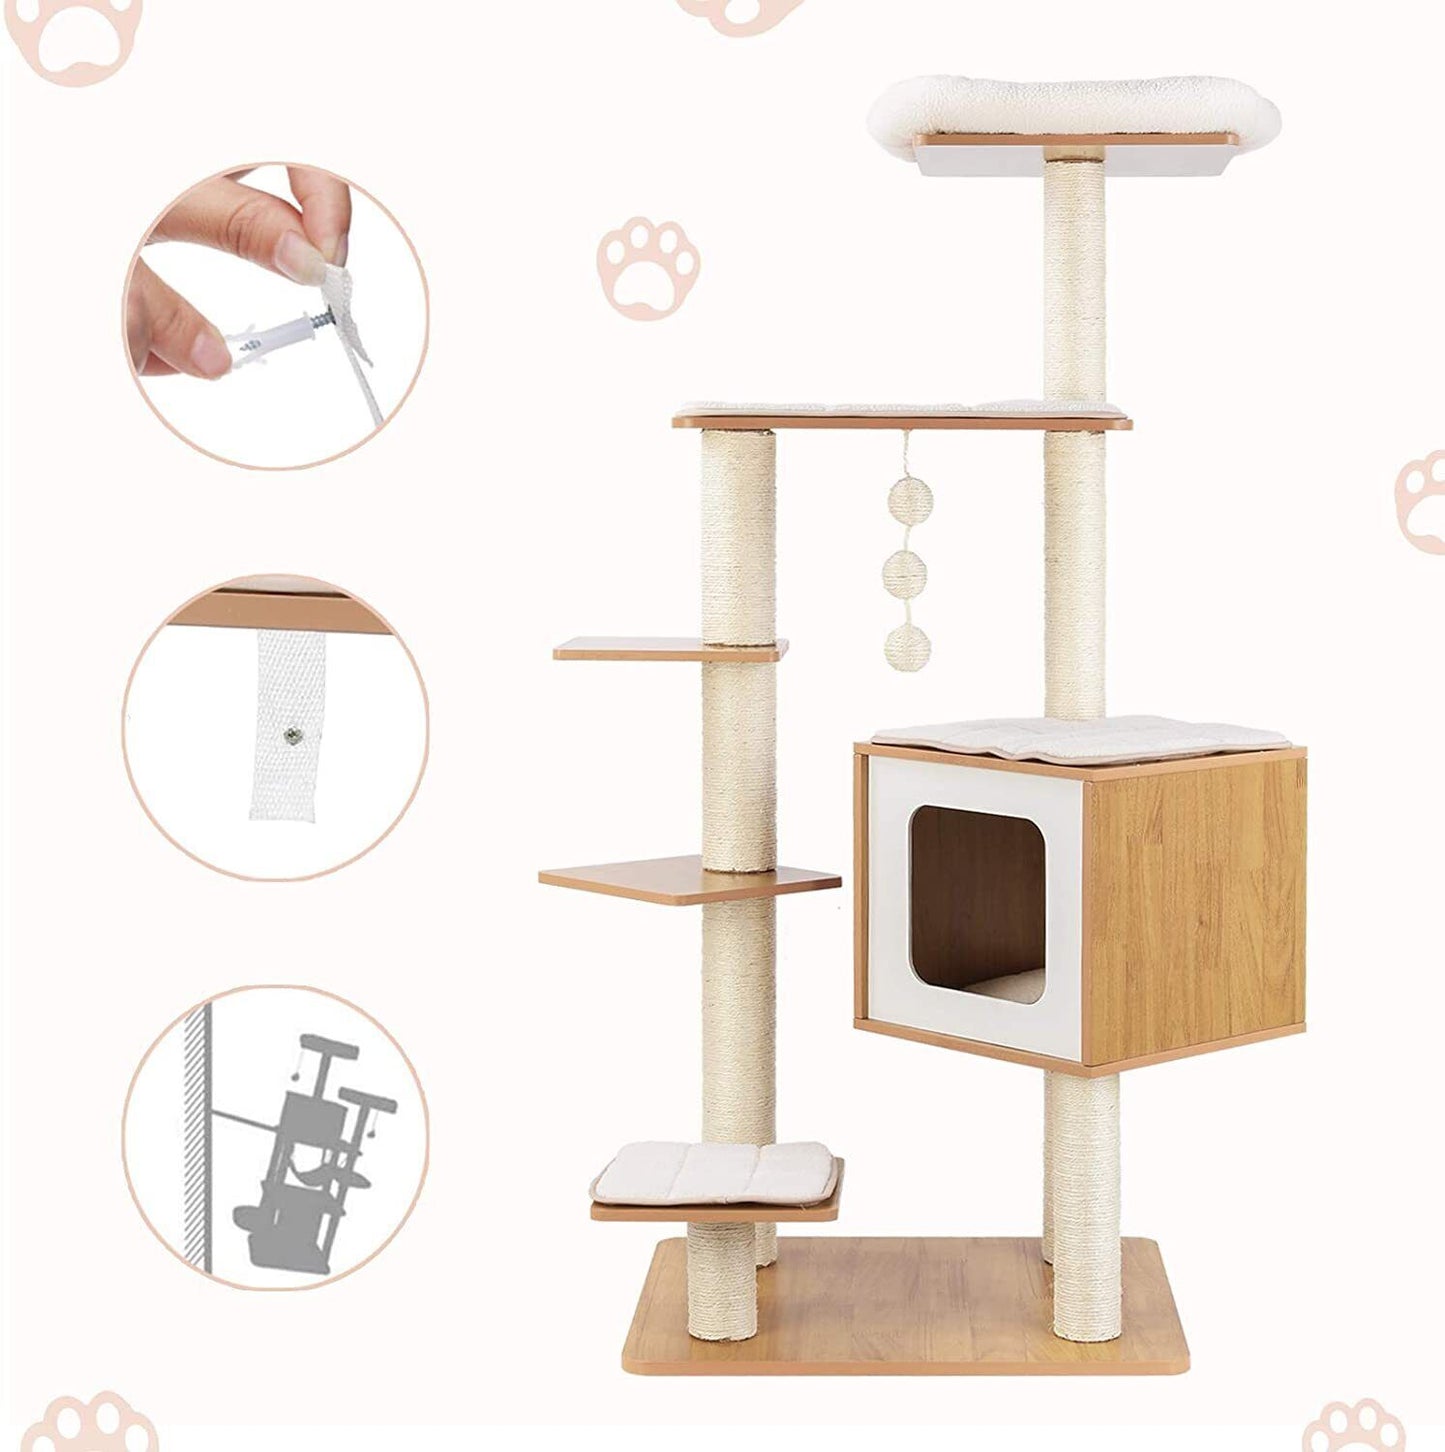 Arlopu 55'' Tall Modern Cat Tree Tower for Indoor Cats, Wooden Cat Climbing Stand Furniture, 6 Level Platform Cat Activities Condo House with Scratch Post, Washable Mats & Top Perch, for Kittens & Large Cats